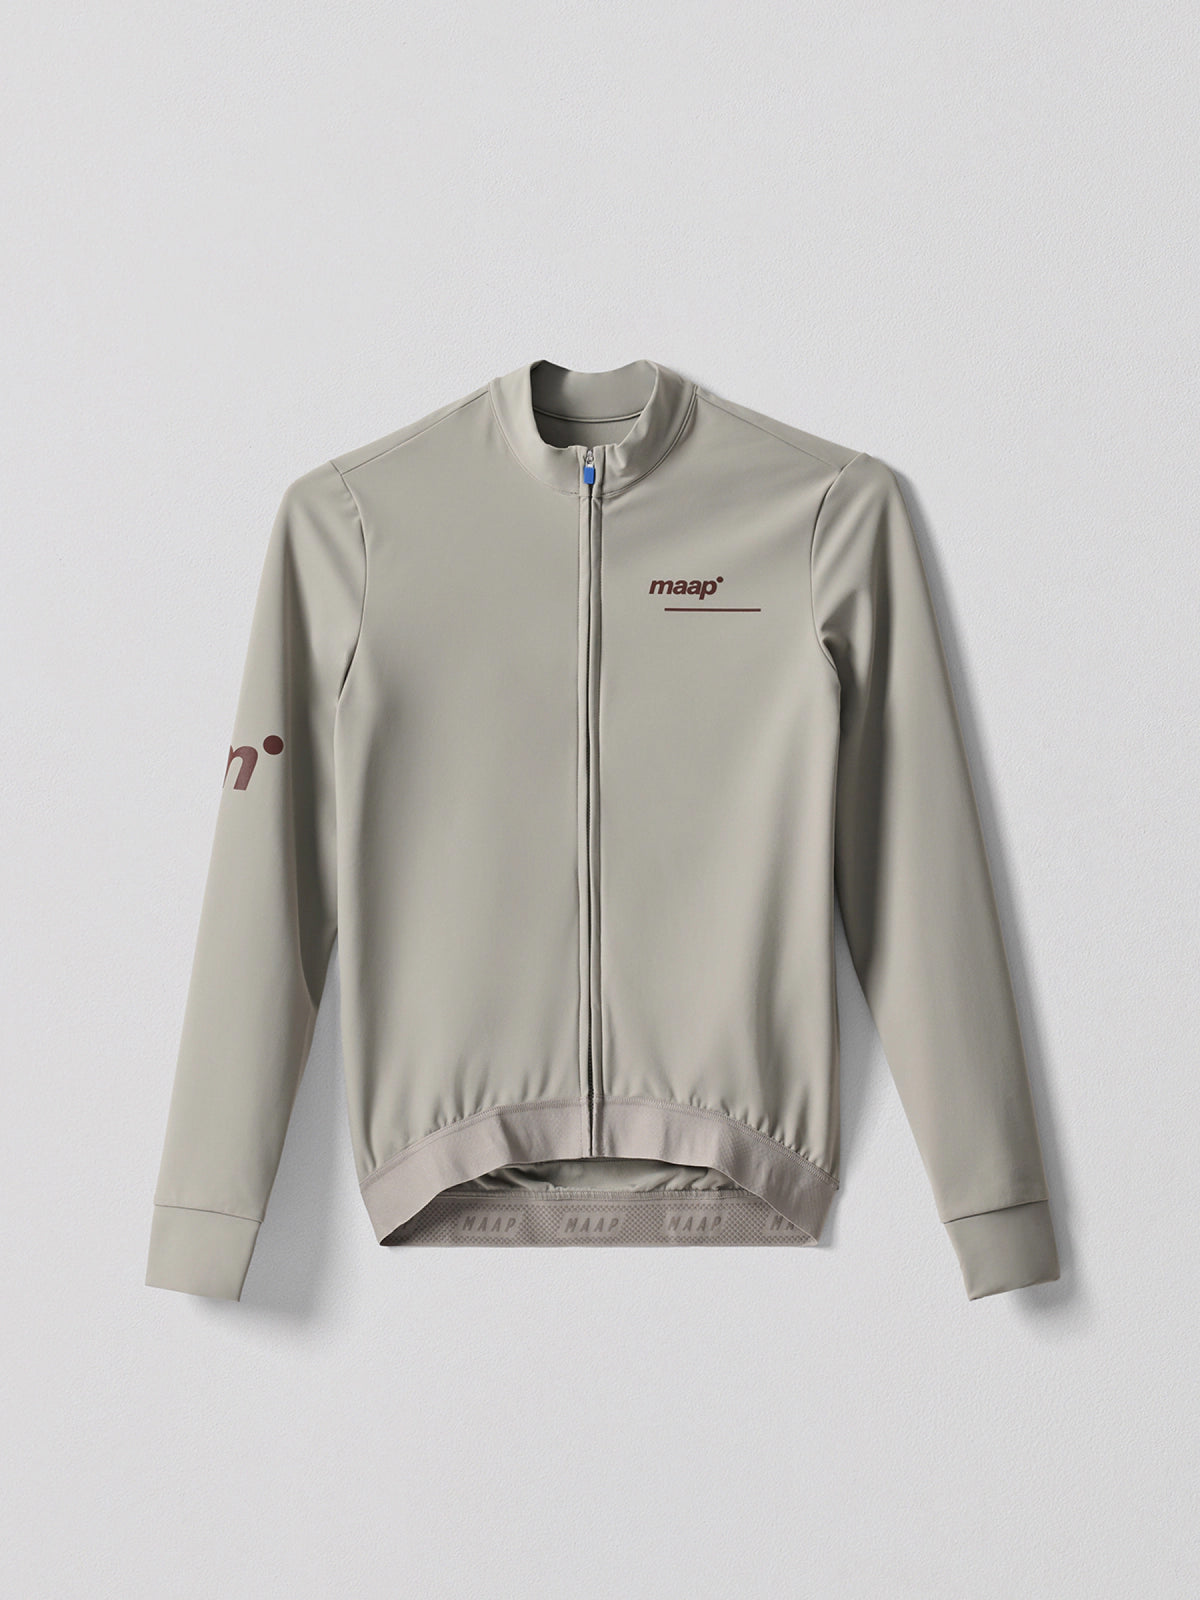 Thermal Training LS Jersey - Griffin